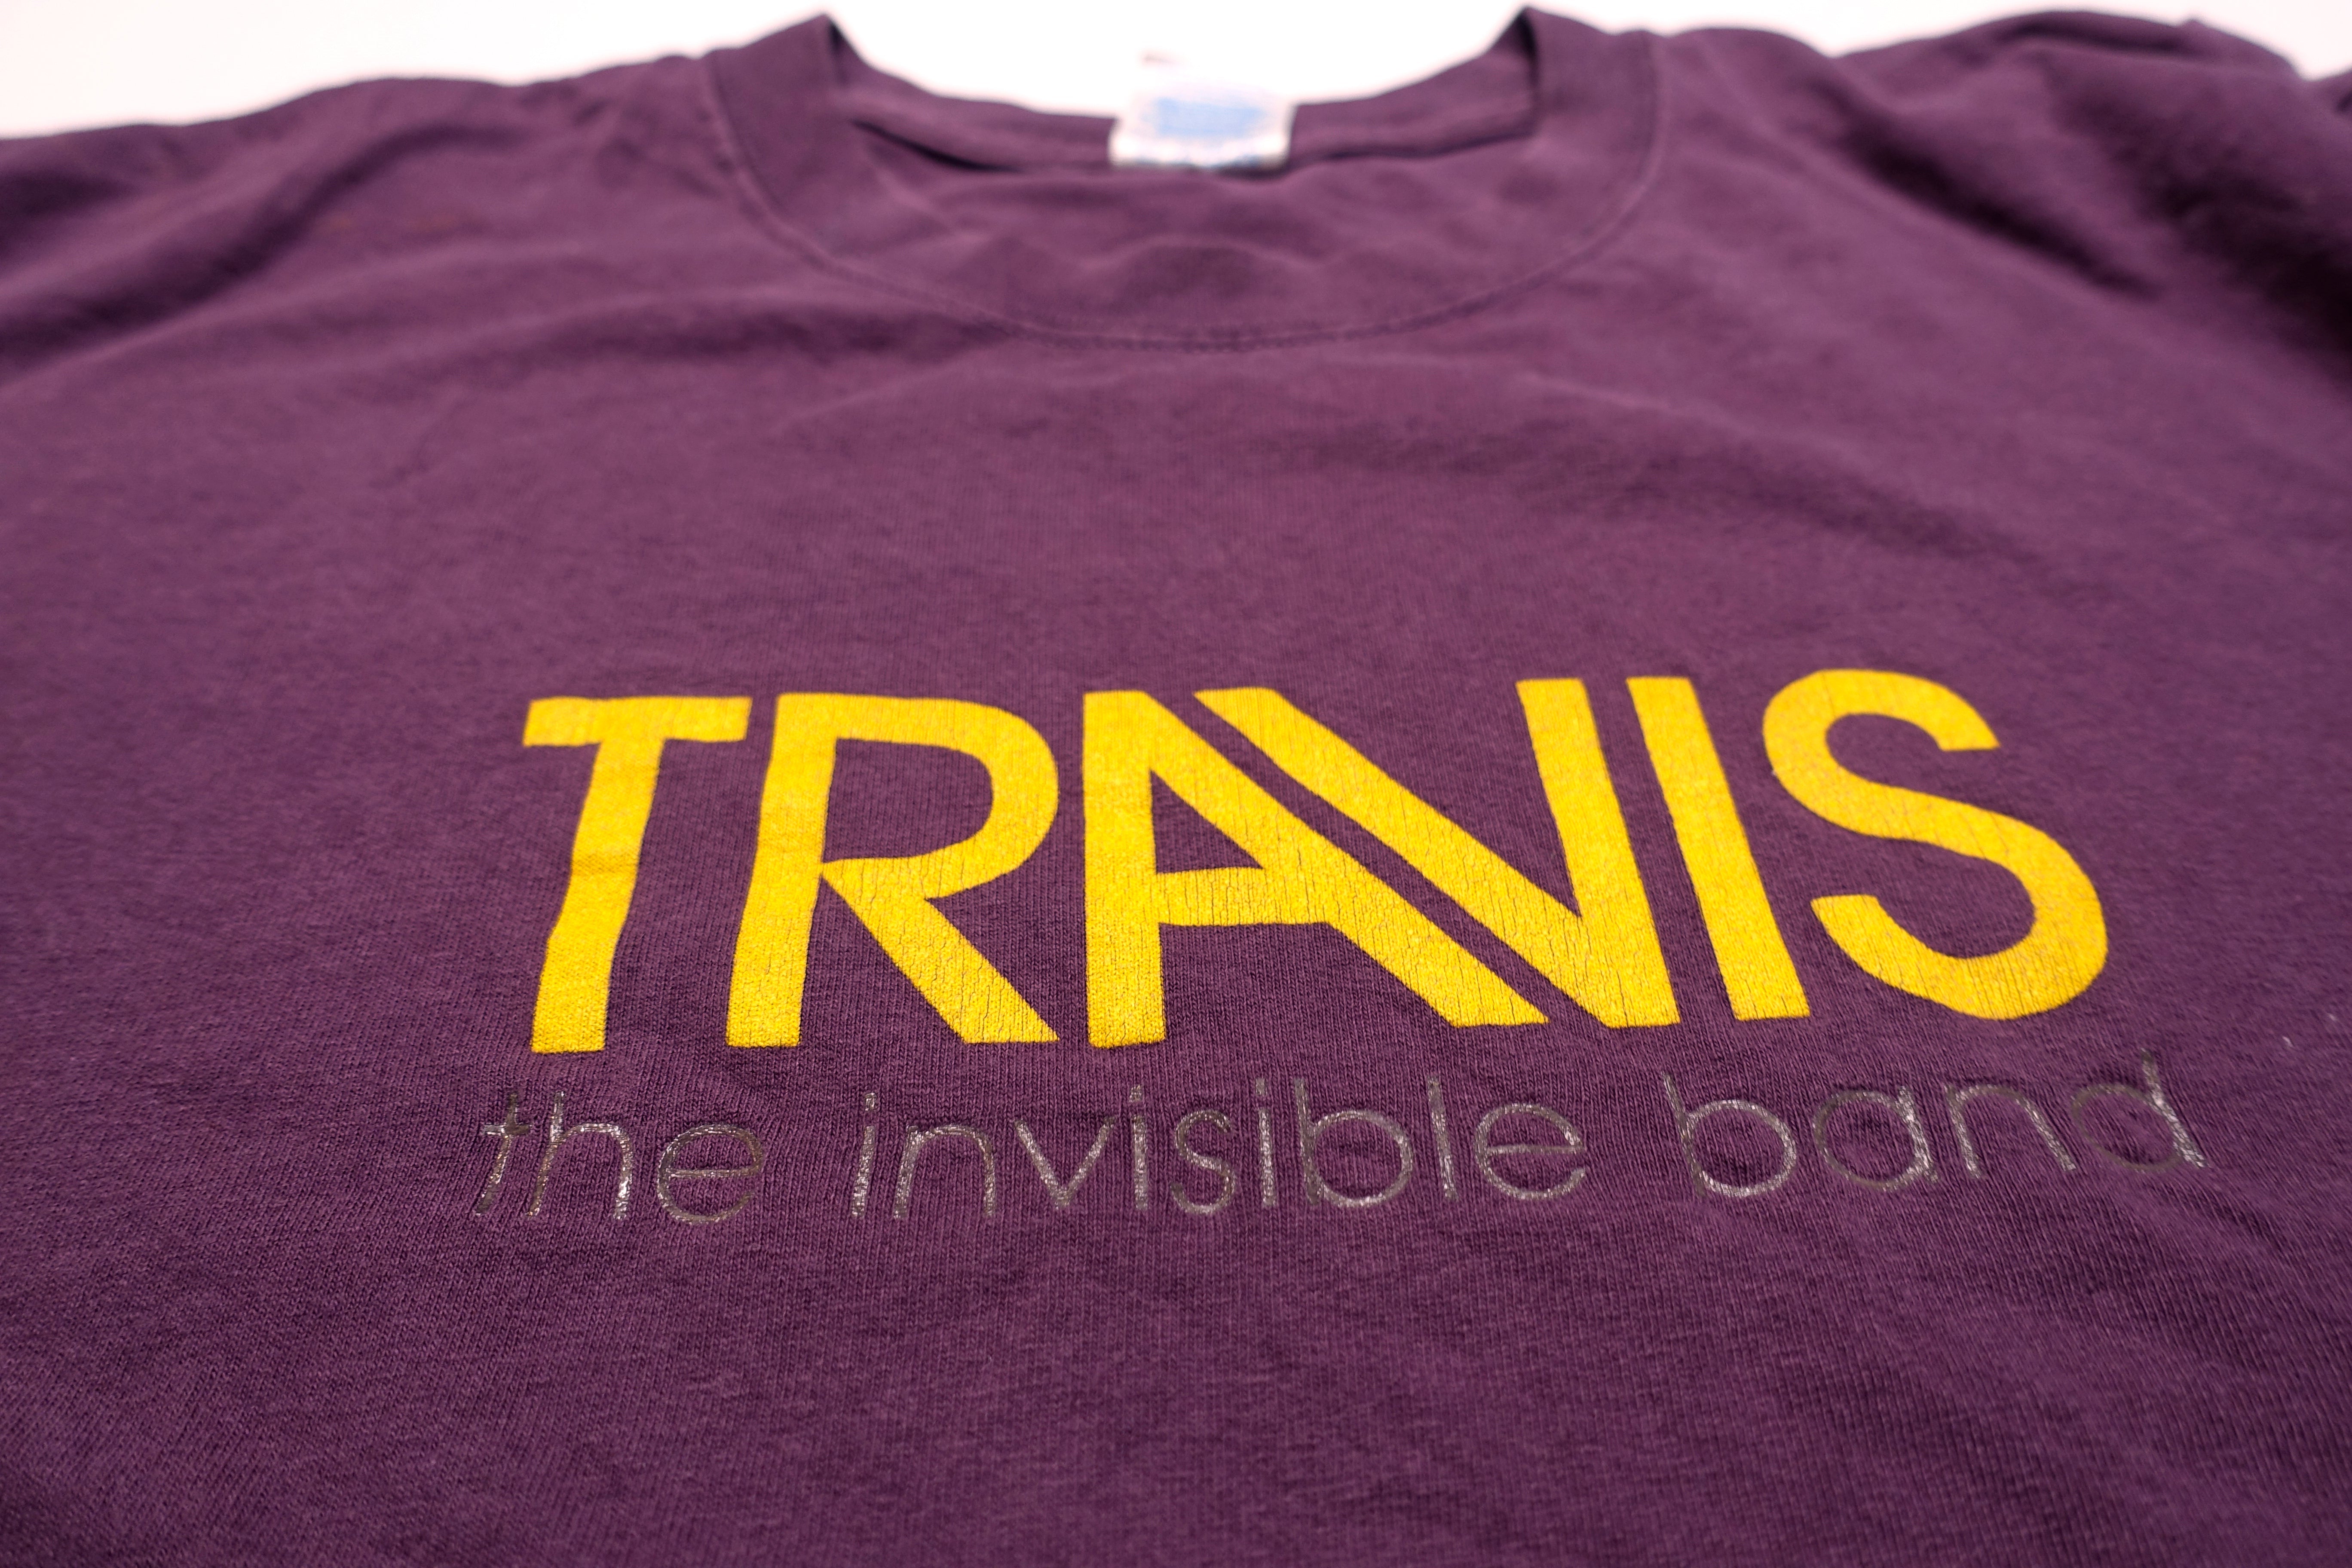 Travis – The Invisible Band 2001 Tour Shirt (Yellow Logo) Size Large